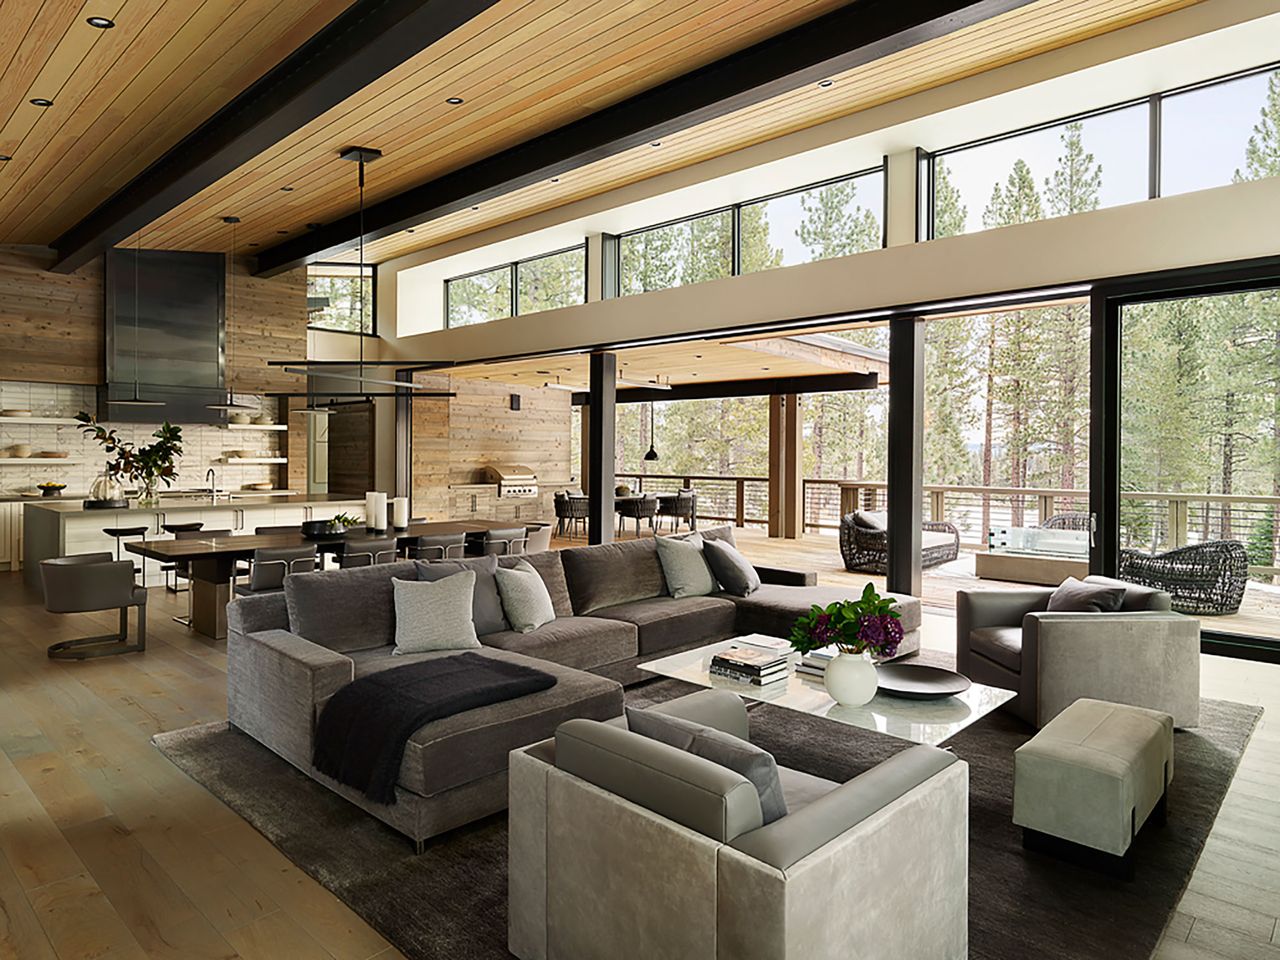 This mountain home has refined style and year-round luxury